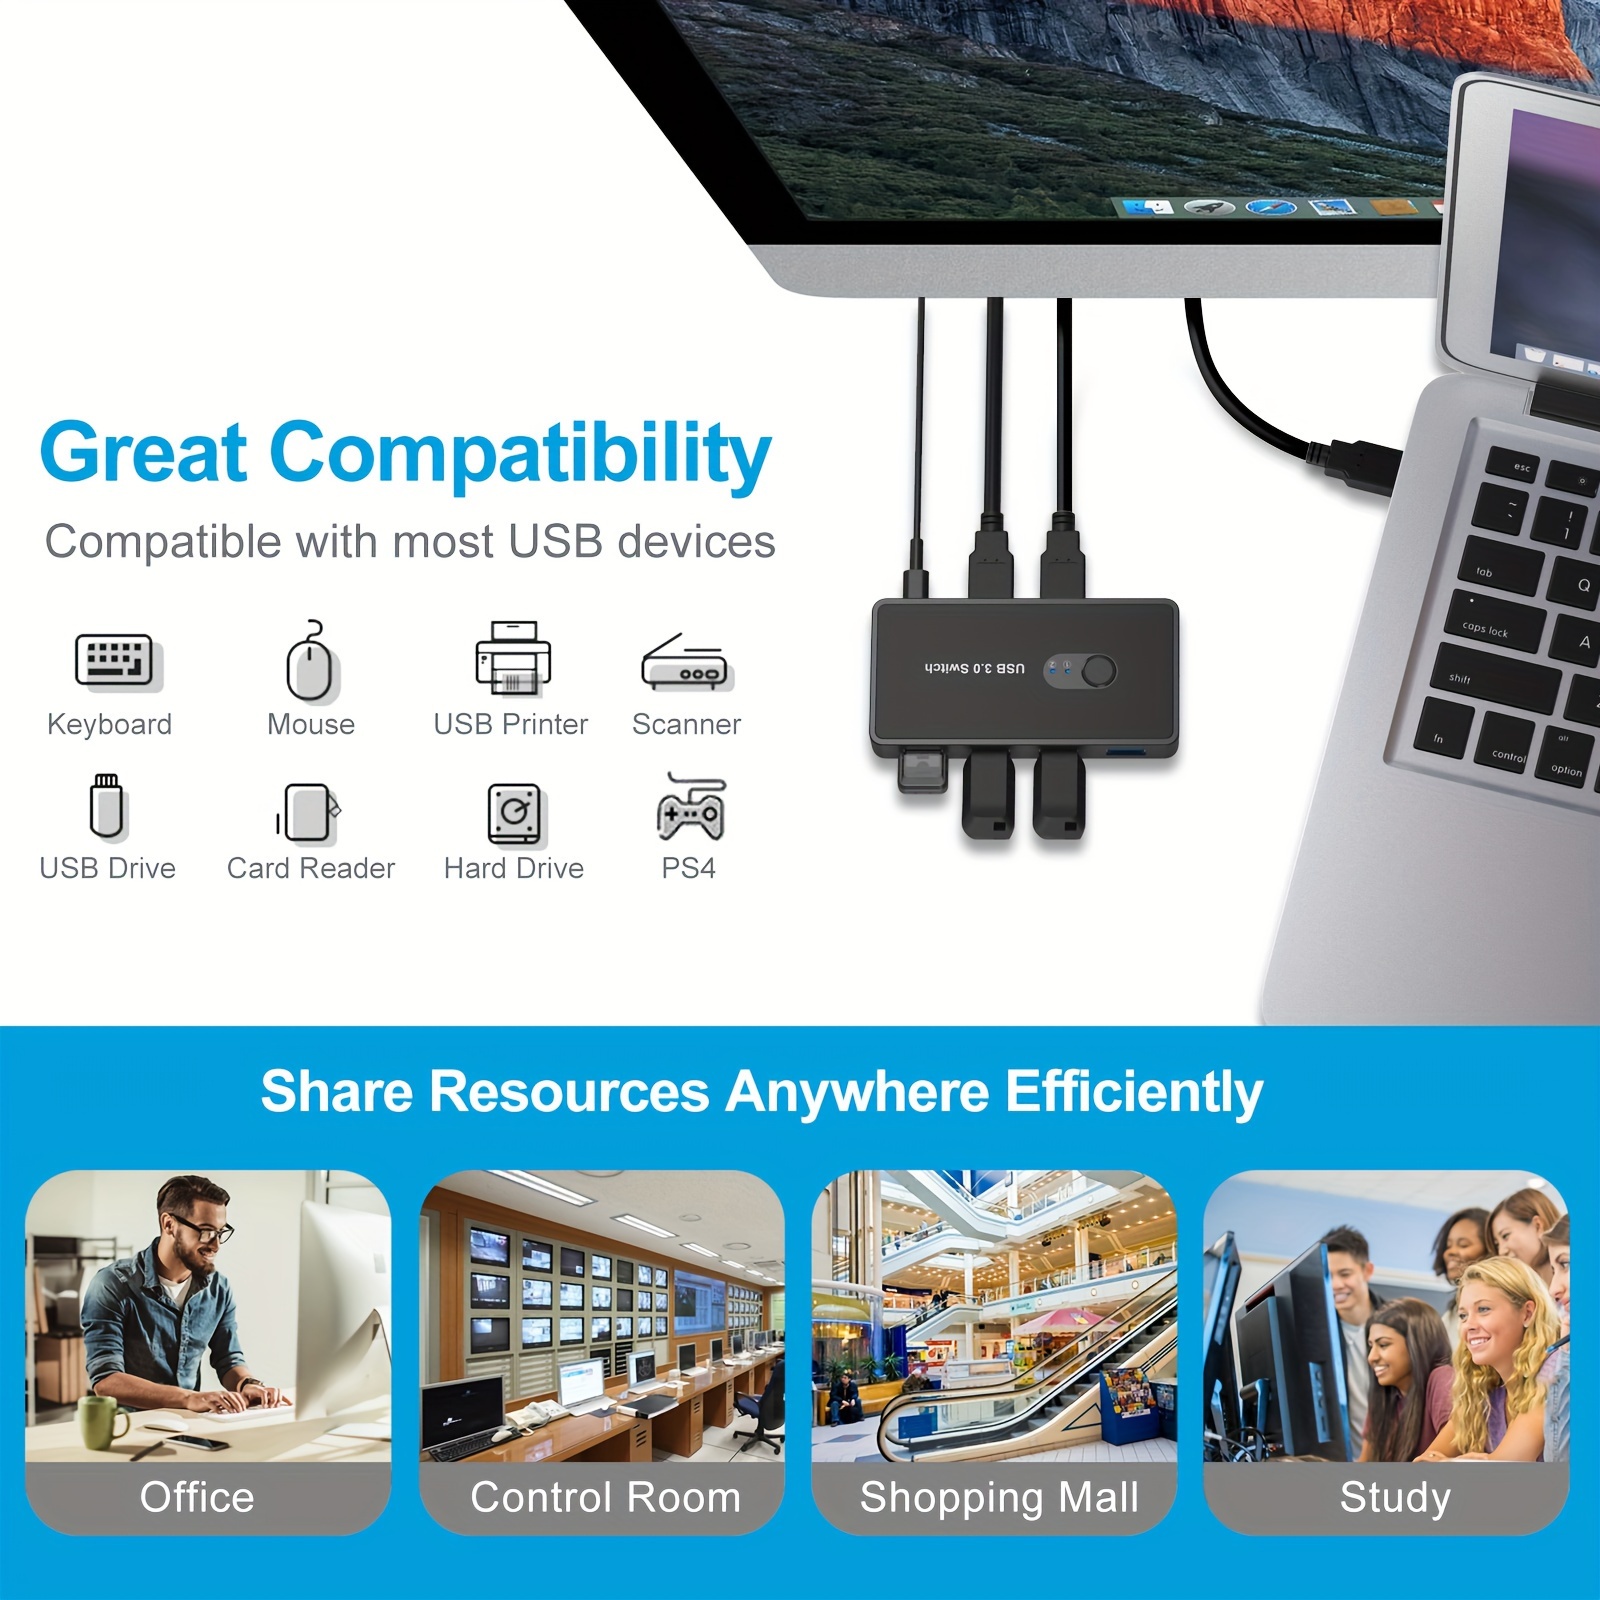 UGREEN USB 3.0 Switch 2 Computers Sharing USB C & A Devices, 4 Port USB  Switcher Sharing Keyboard and Mouse, Printer/Scanner USB Switch Hub for Two